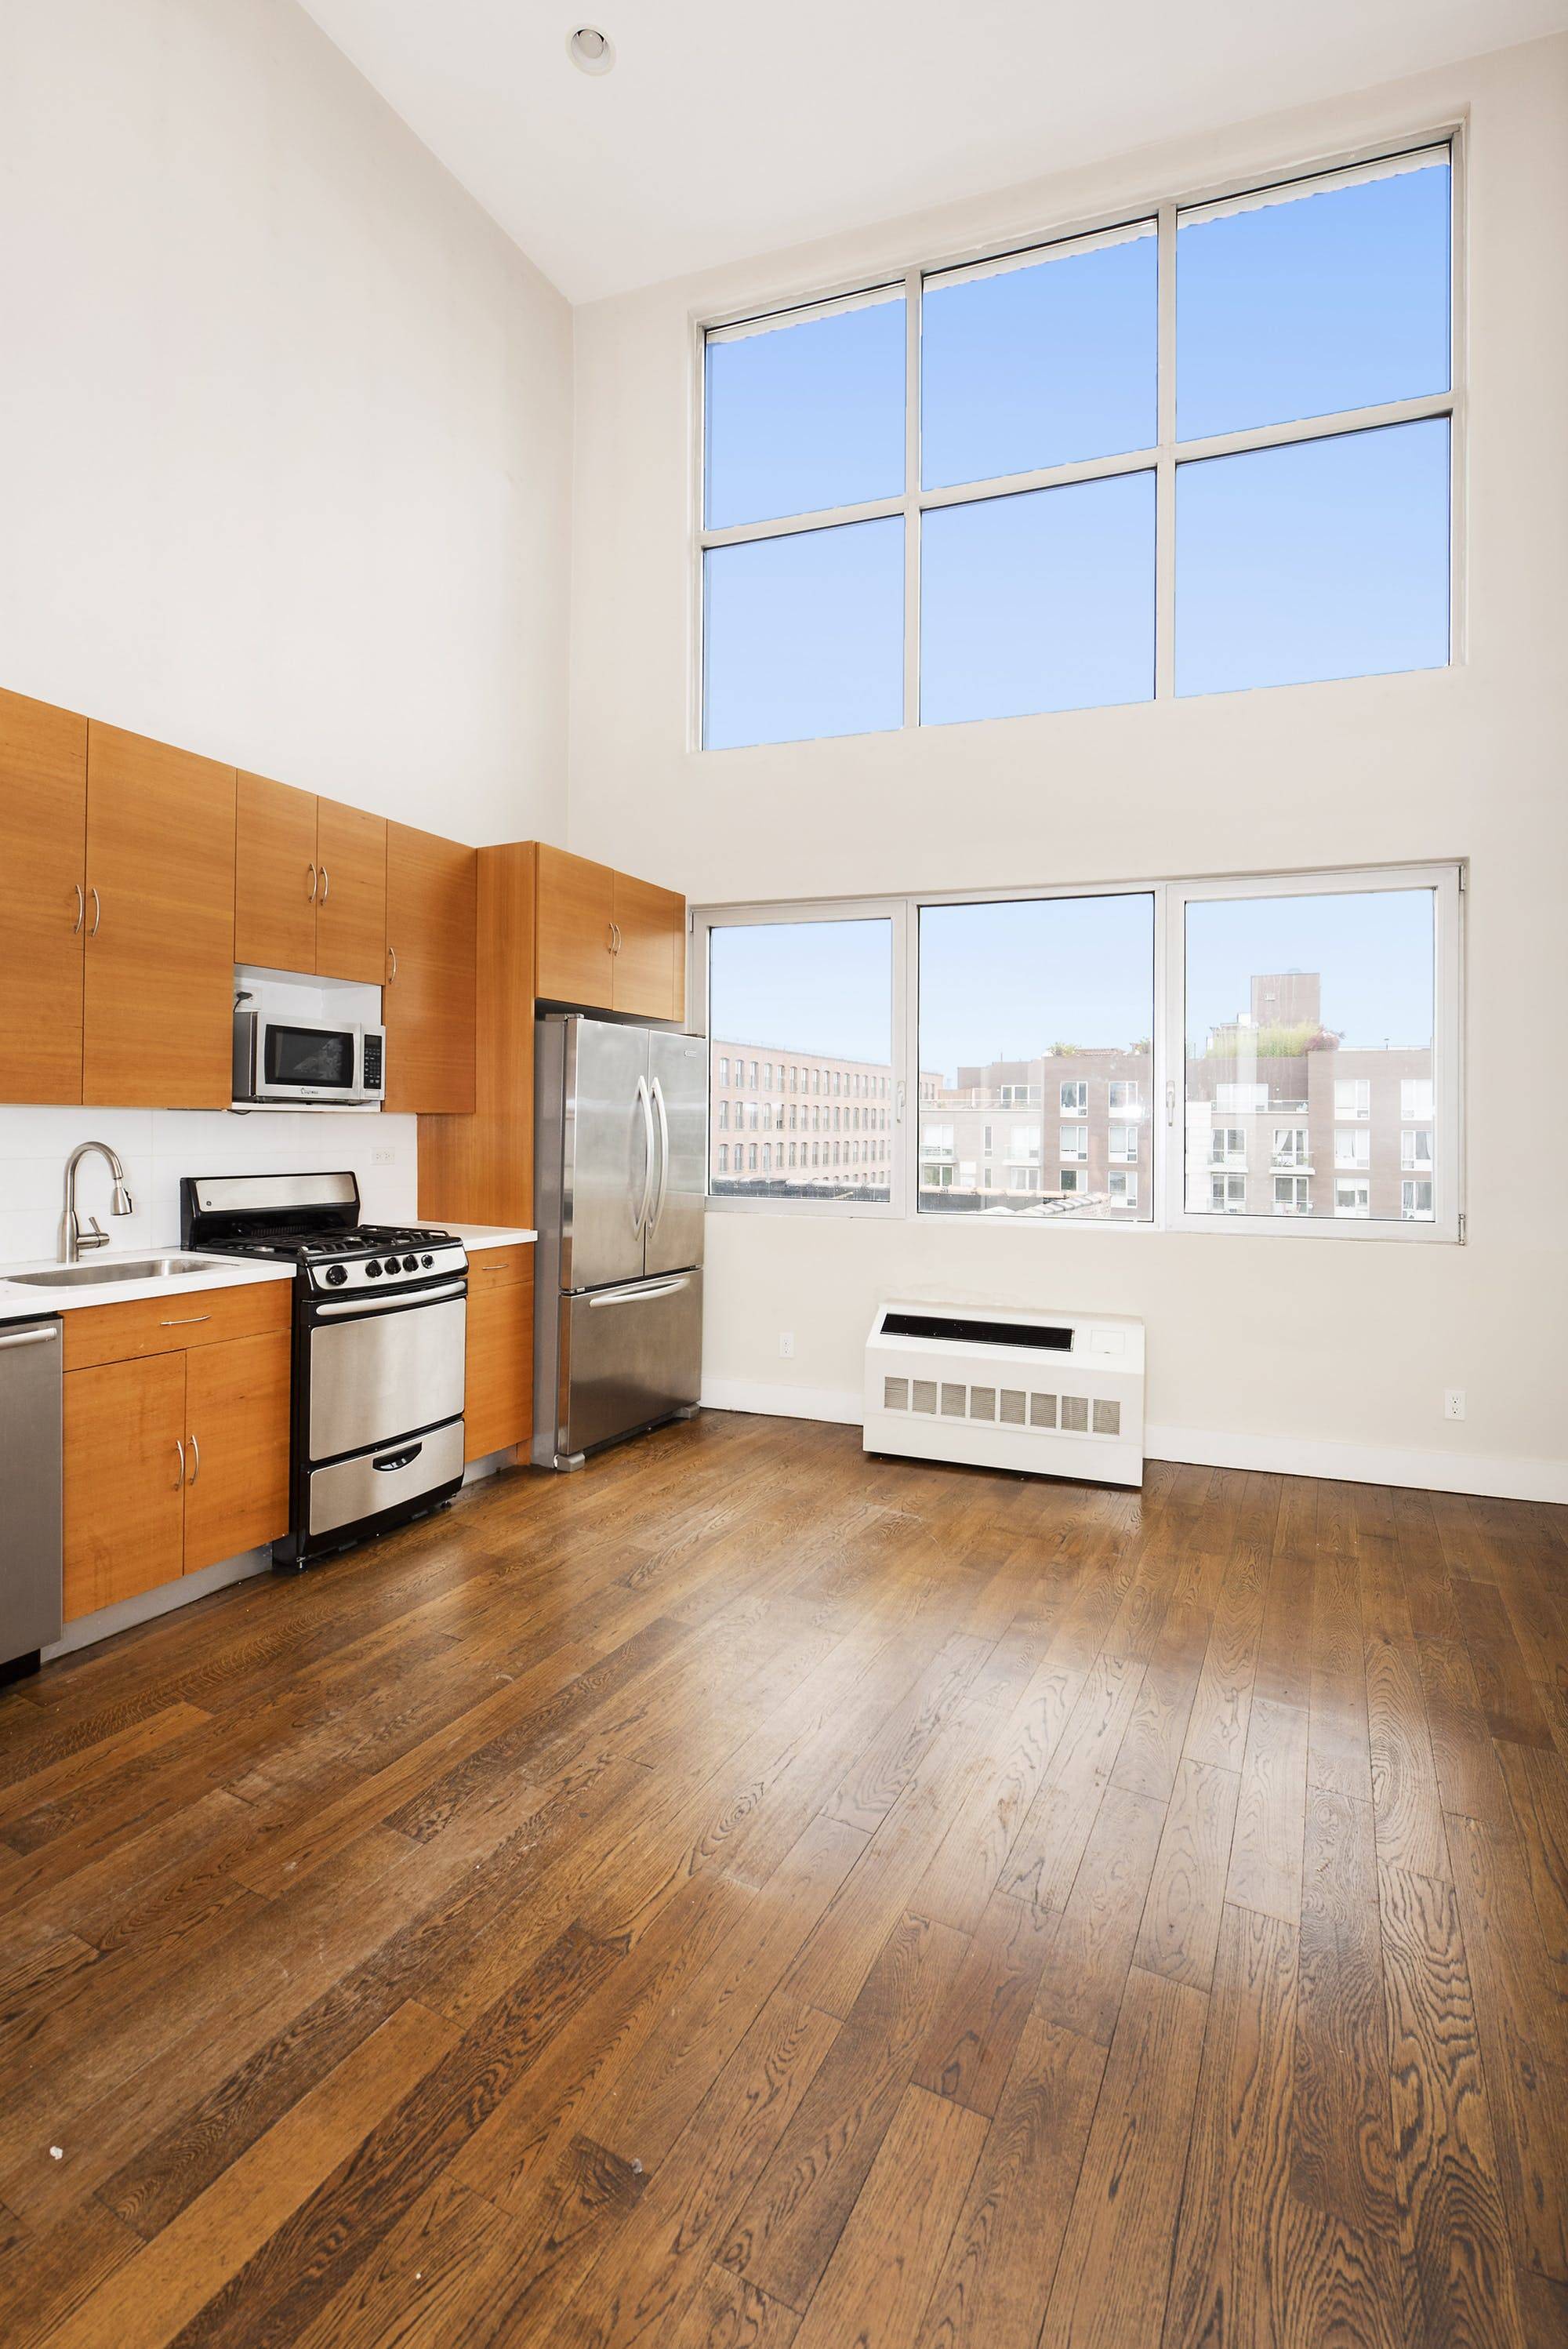 No Fee amp ; One Month Free Penthouse living in prime Williamsburg This 1, 155sf duplex penthouse, located in prime Williamsburg has 3 spacious bedrooms, 2.